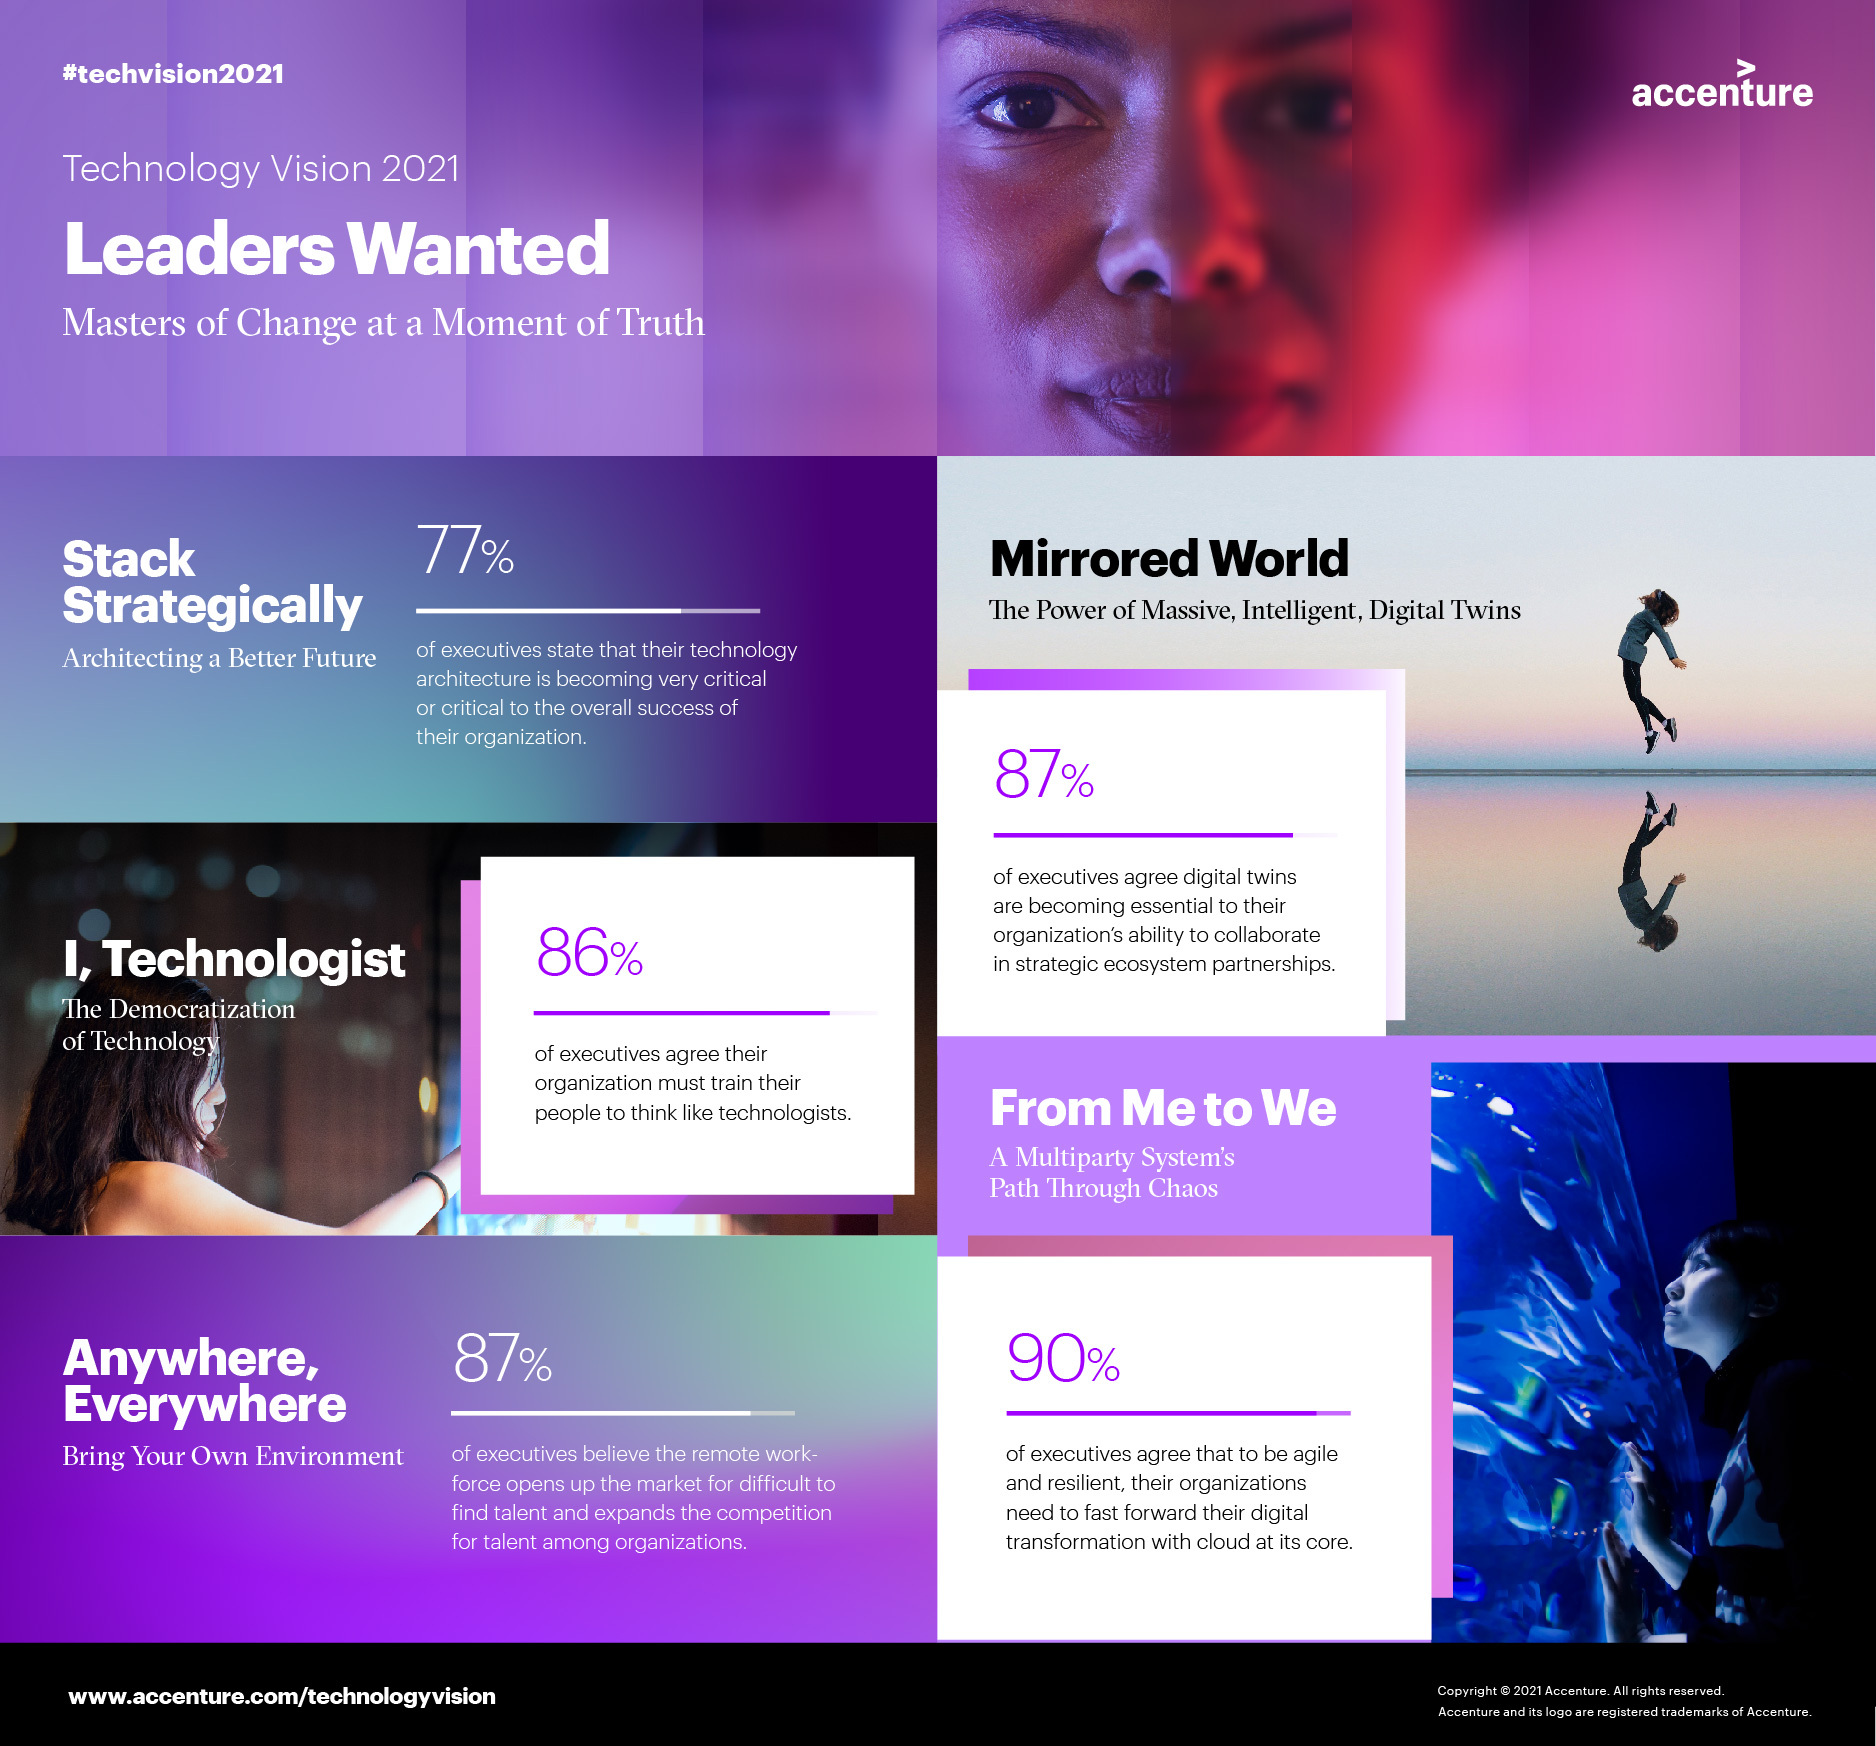 Accenture-Technology-Vision-2021-Infographic.jpg?mtime=20210217183327#asset:246383